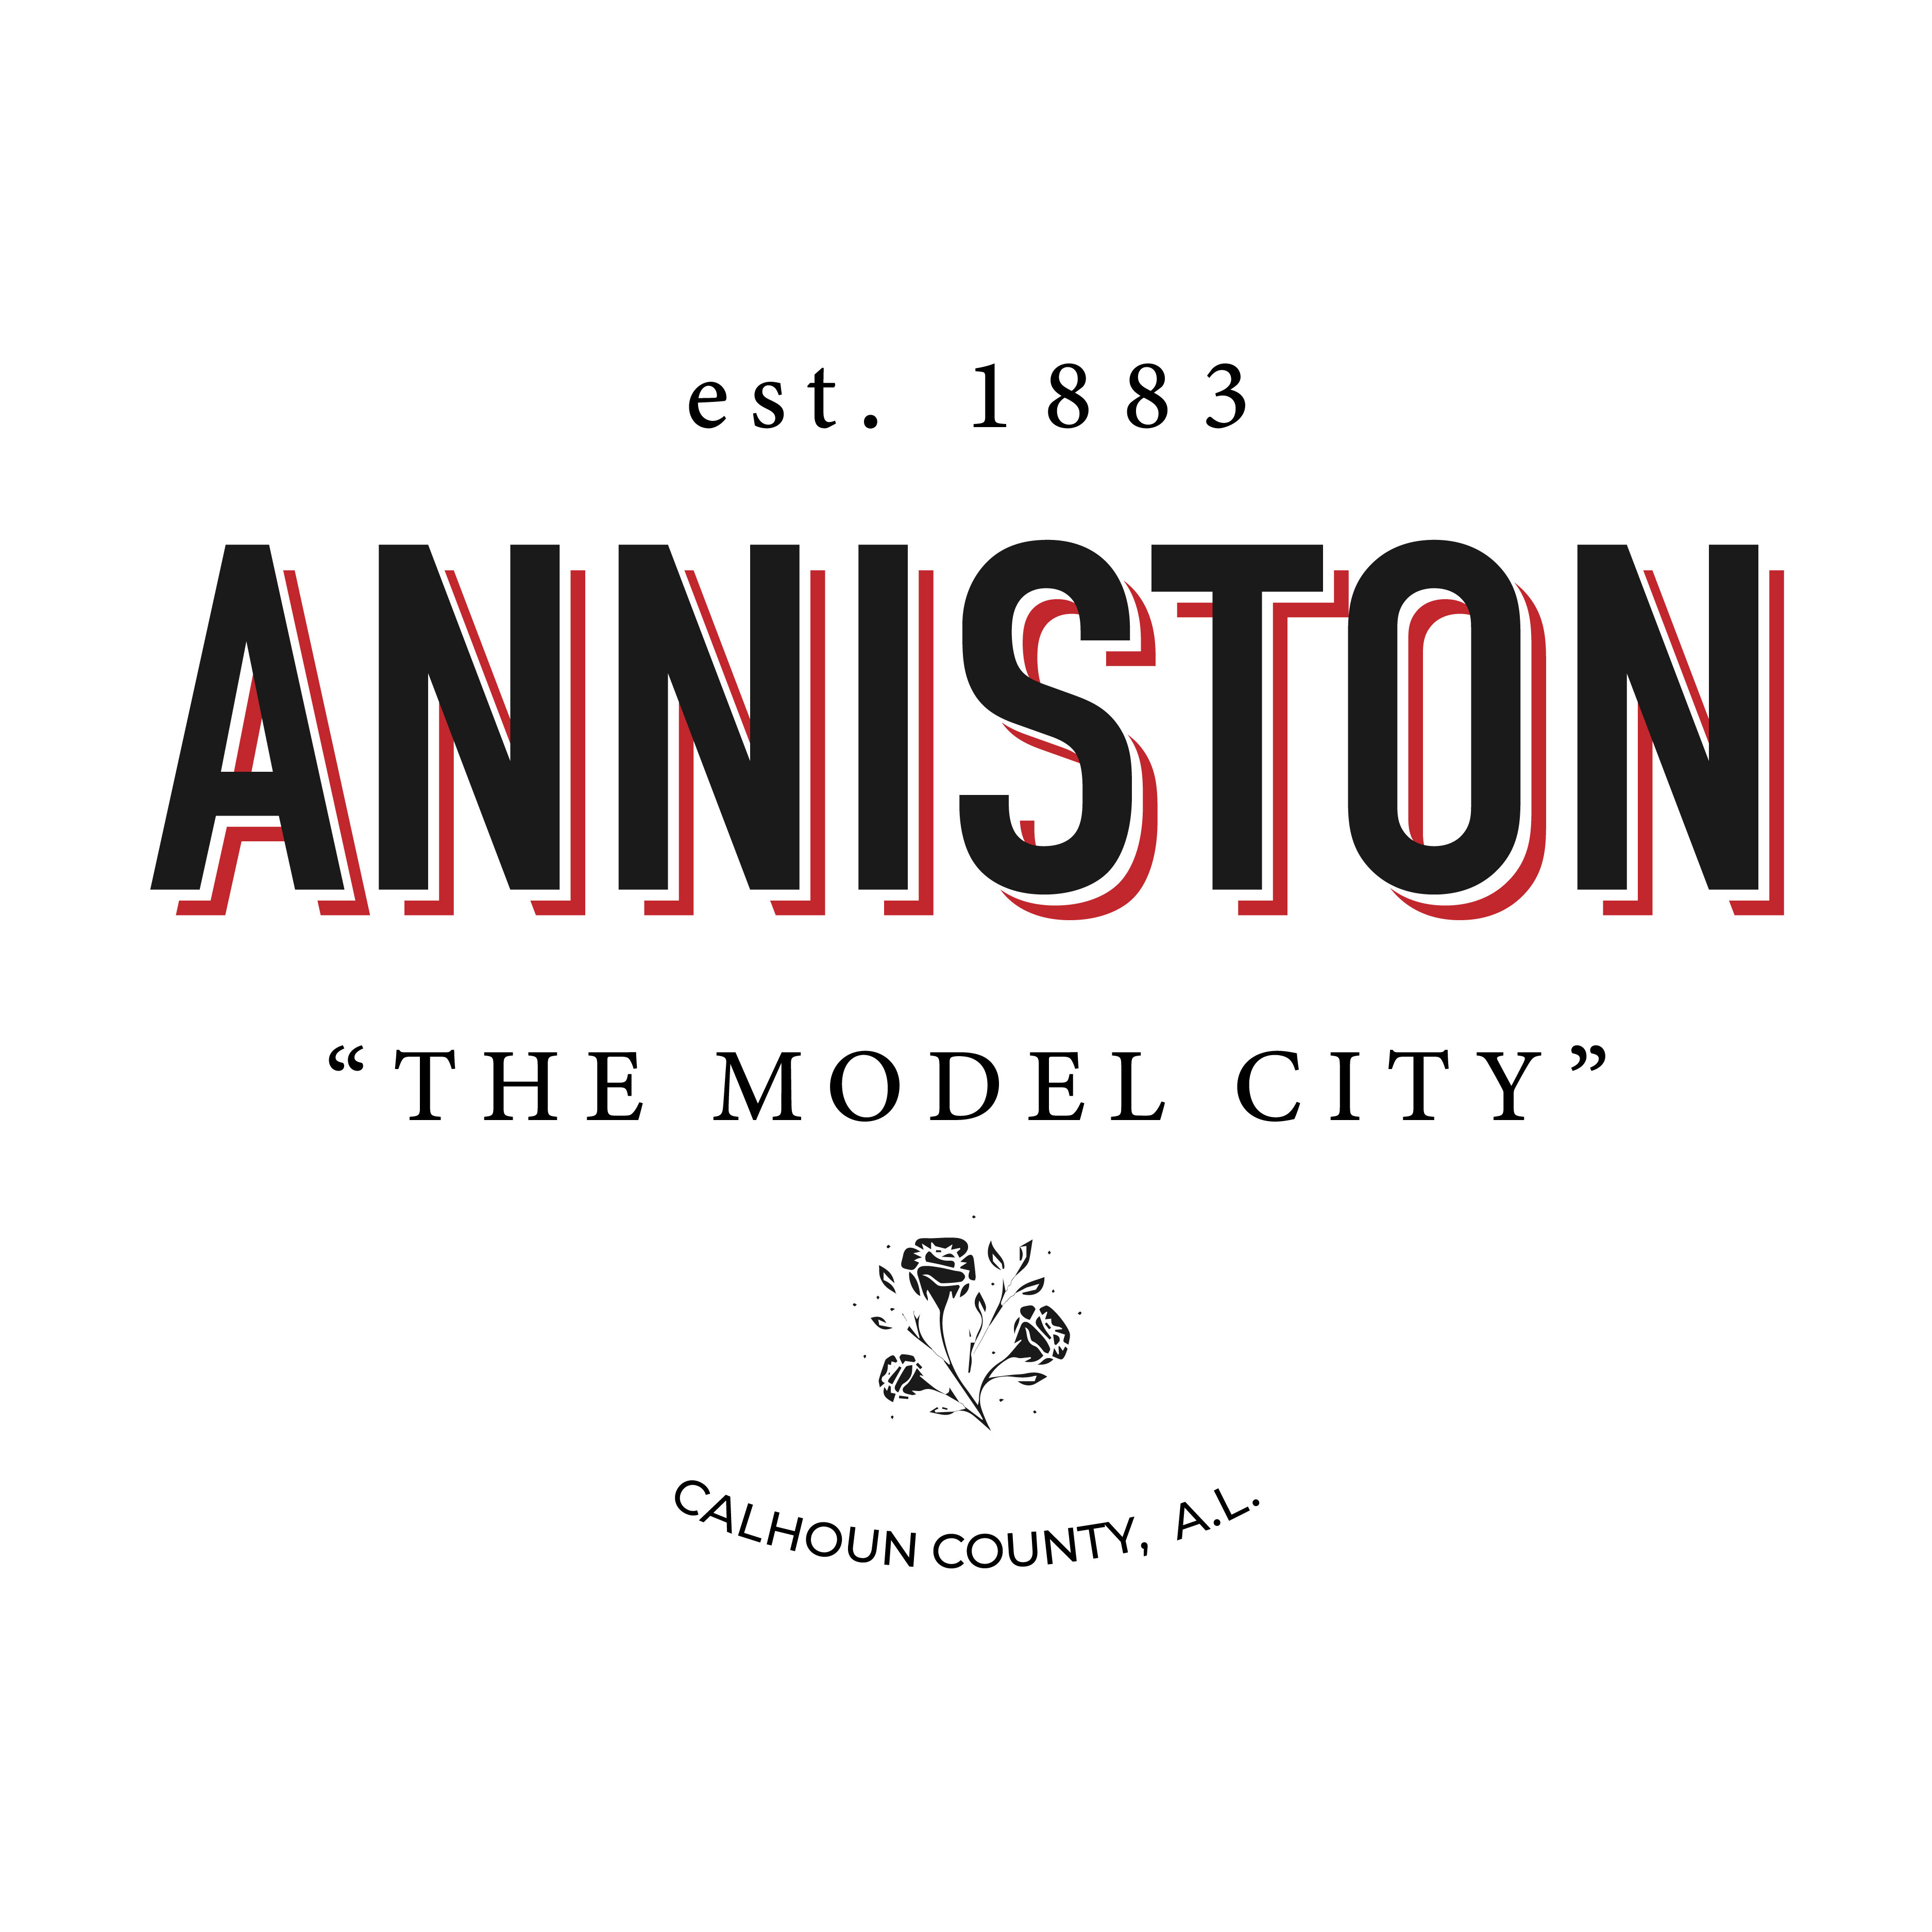 Anniston logo design by logo designer Thomas Gardner for your inspiration and for the worlds largest logo competition